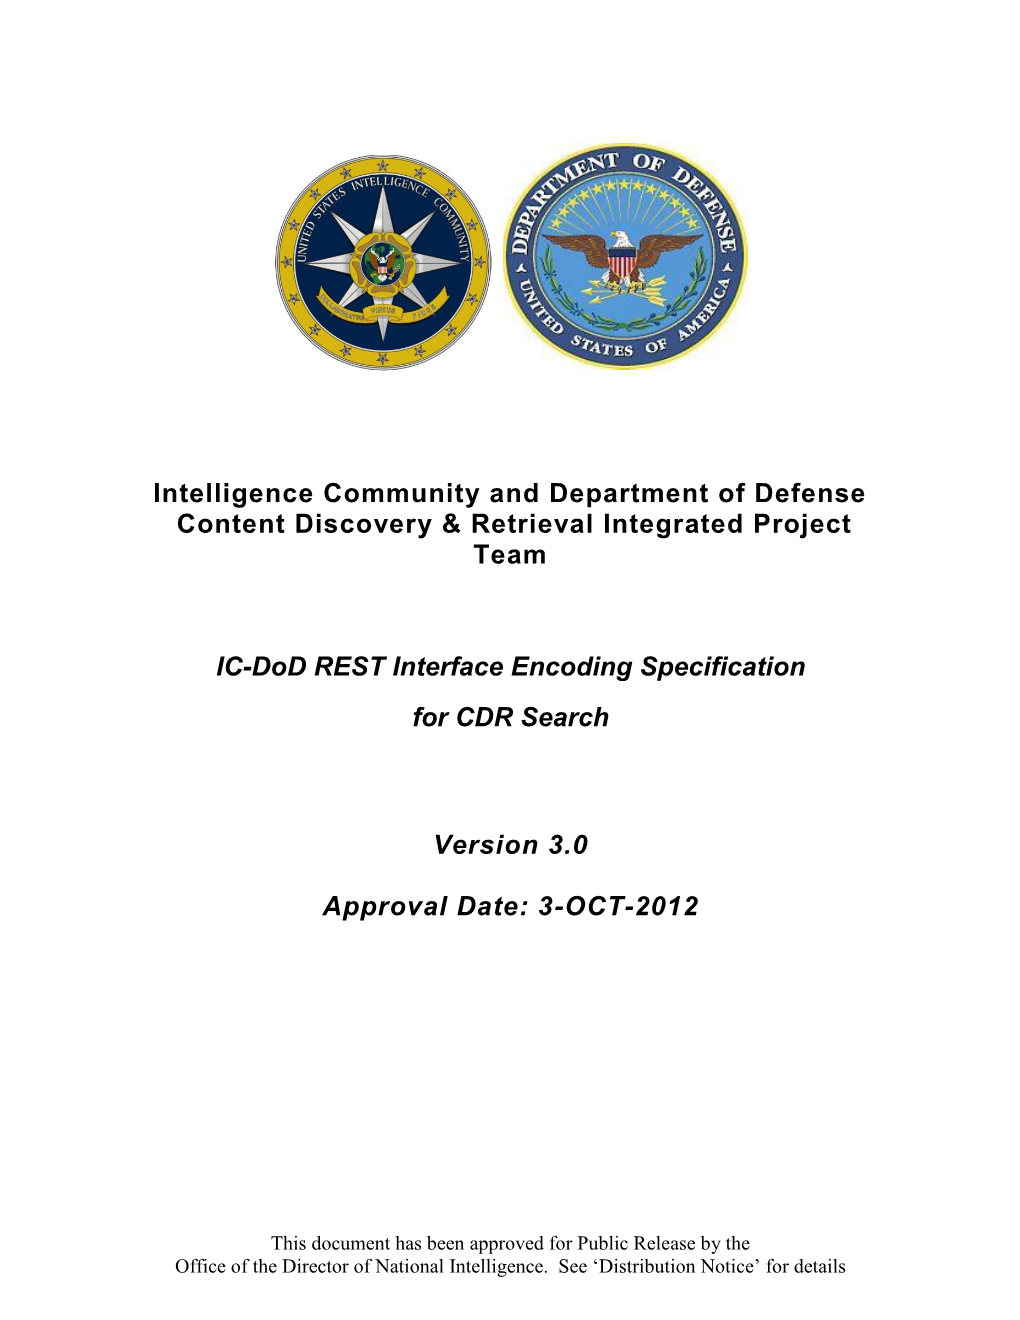 IC/Dod REST Interface Encoding Specification for CDR Search Version 3.0 20121003, October 3, 2012